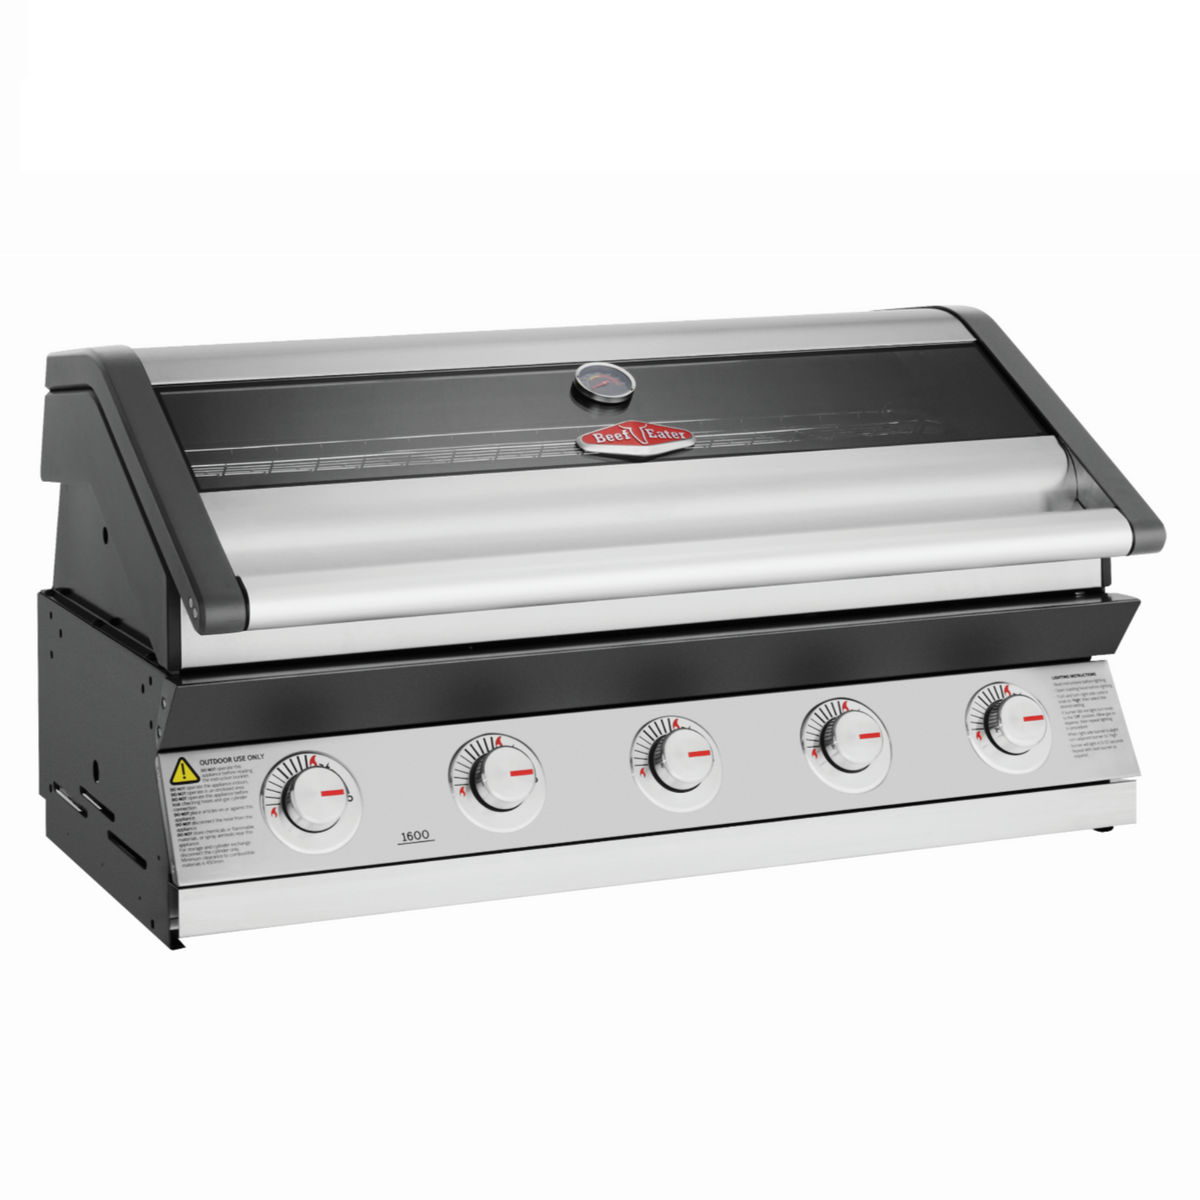 BeefEater 1600S Series 5 Burner Build In Gas Barbecue